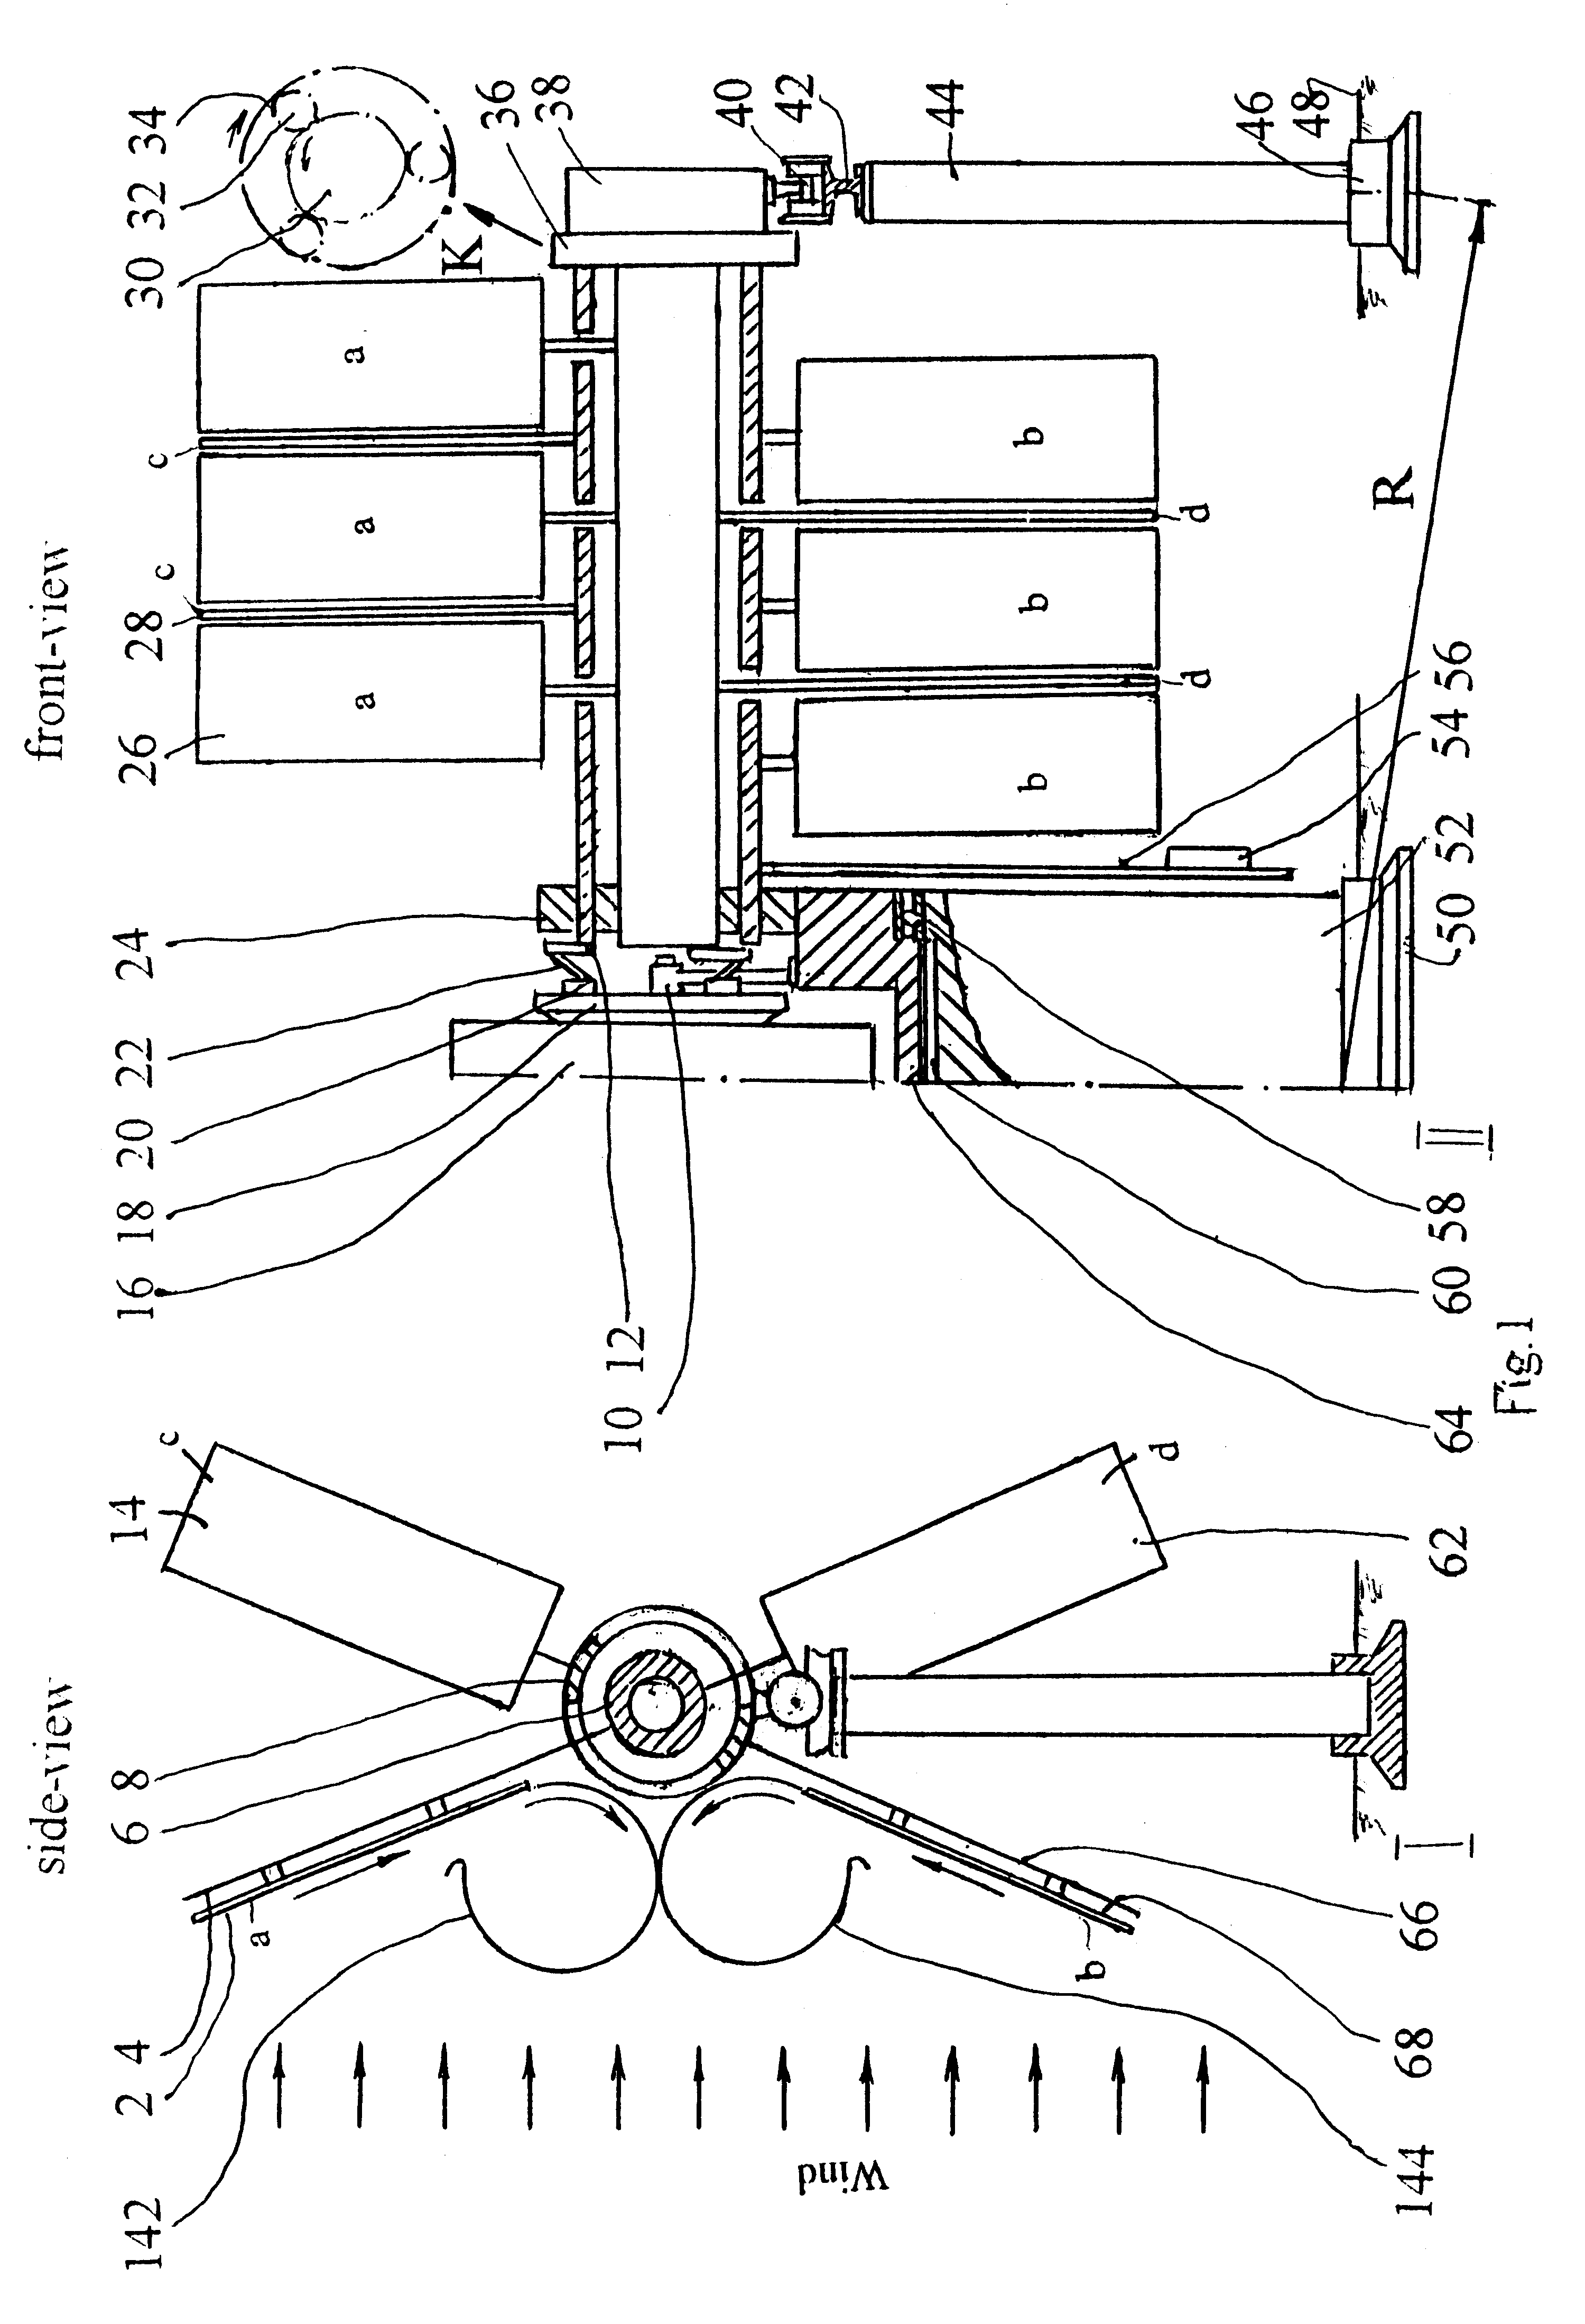 Universal power generator utilizing wind flow of liquid for the manufacturing of water from humid air